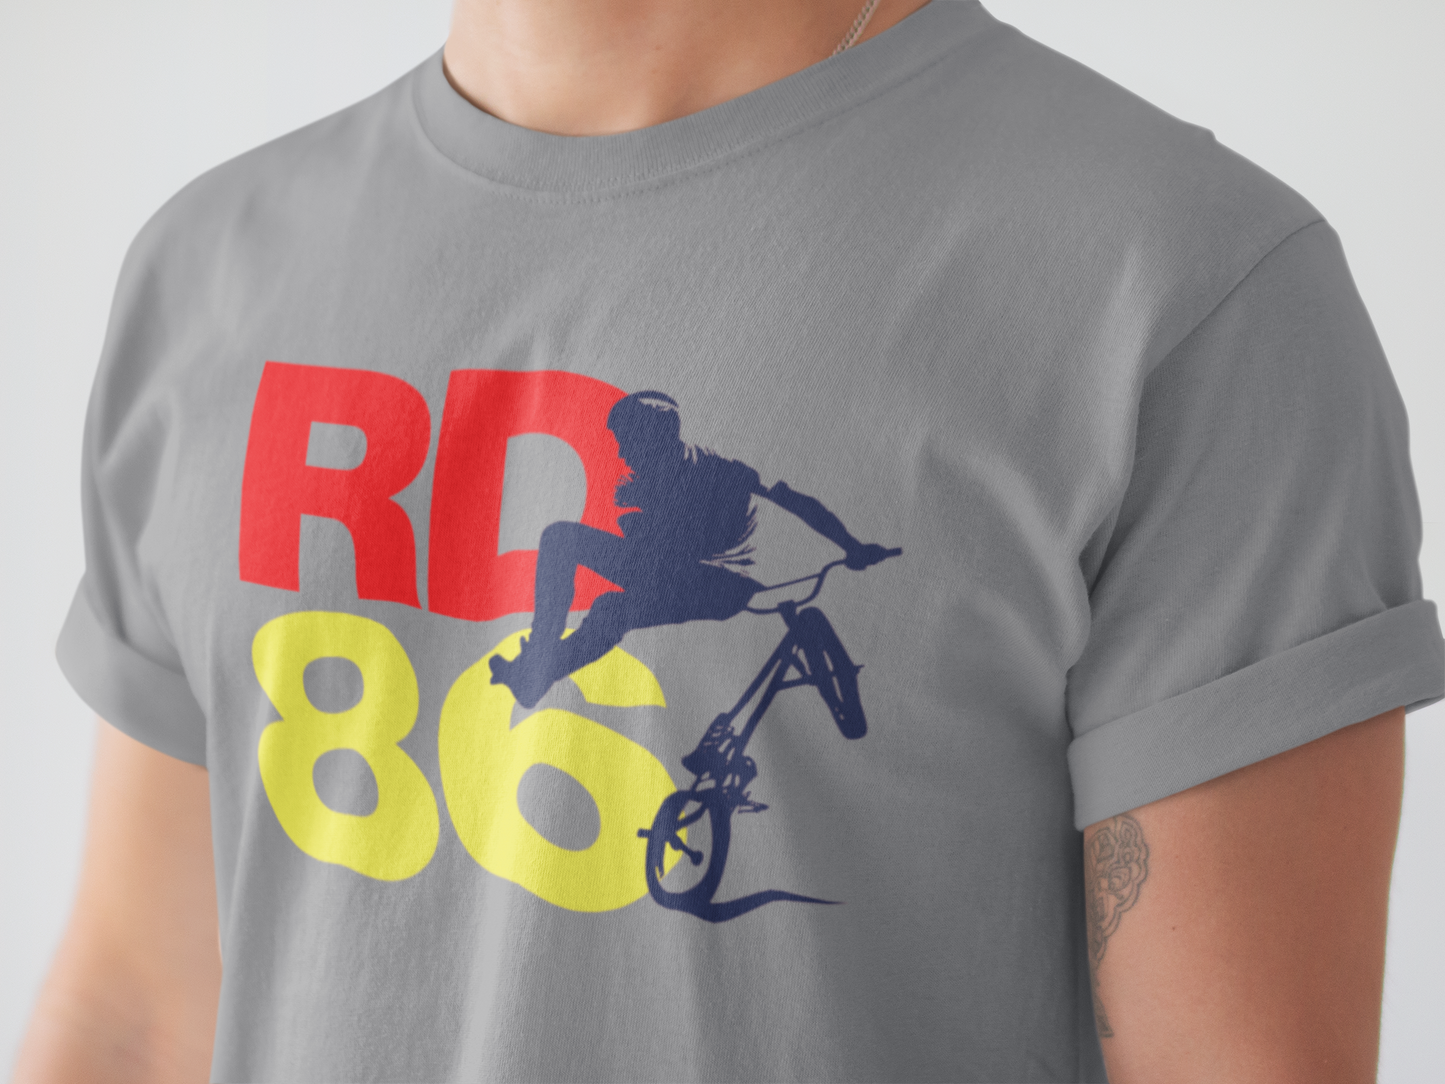 RD86 - Freestyle